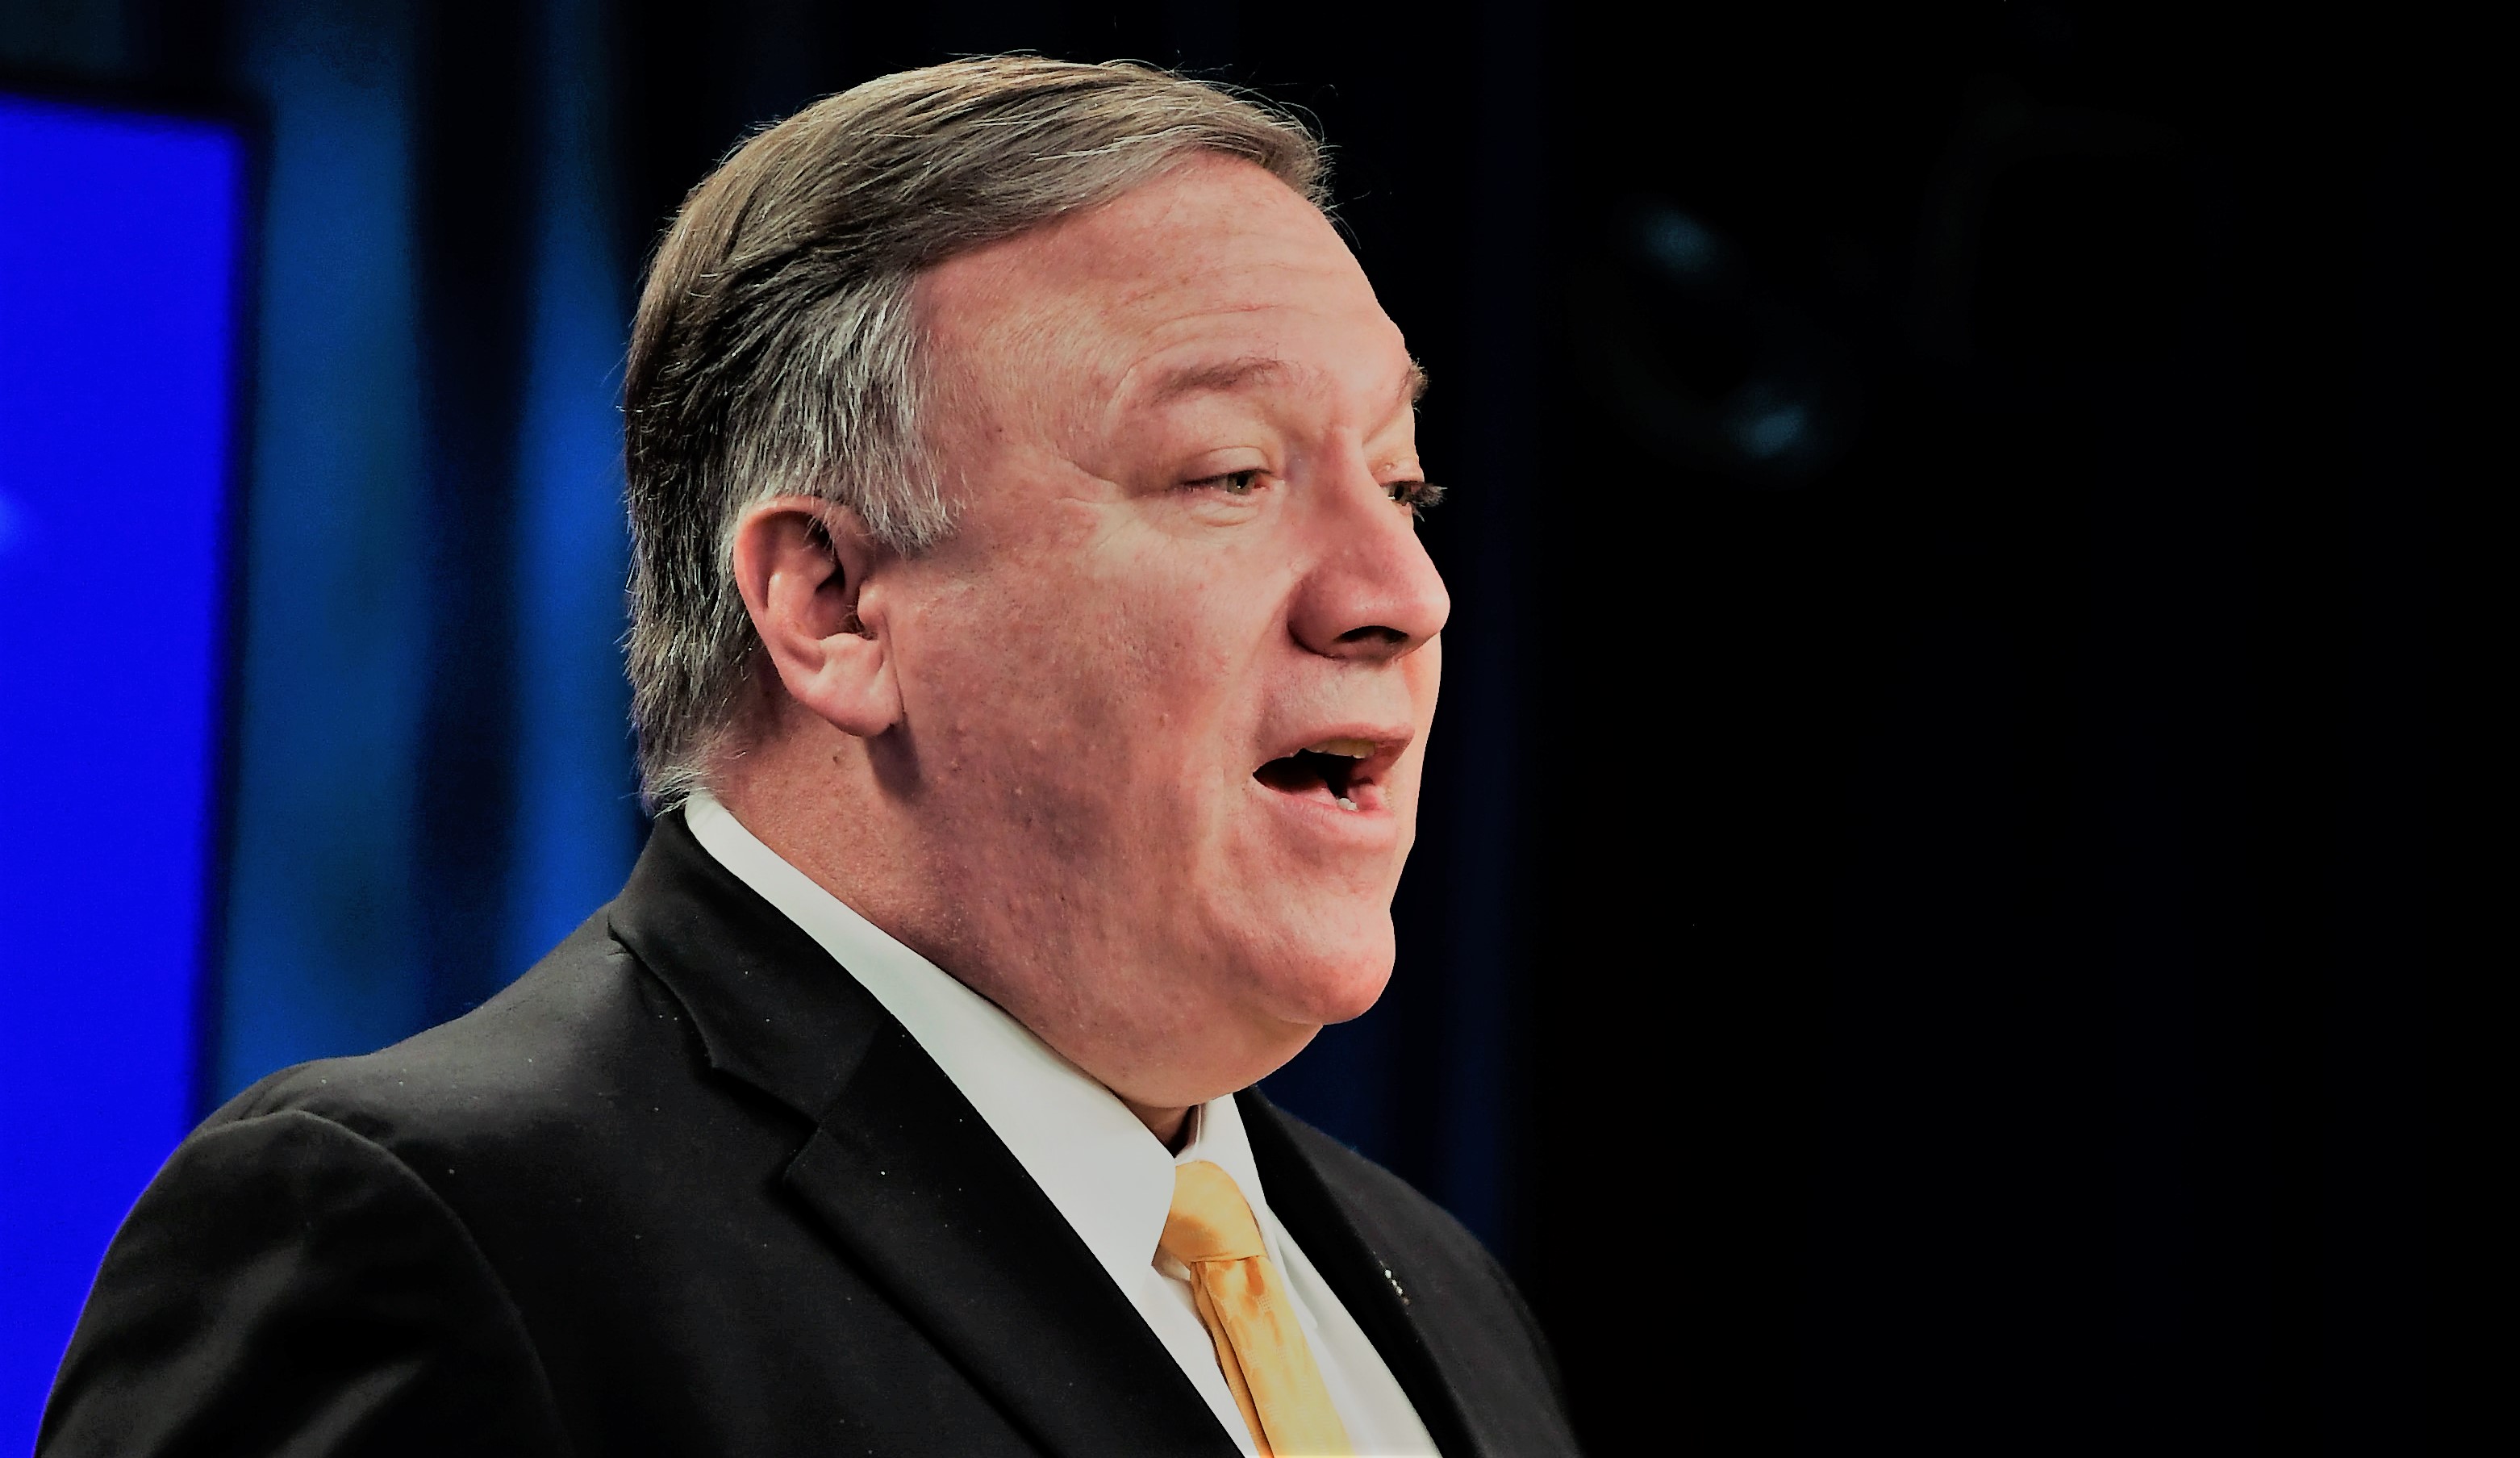  World News Roundup: Pompeo discusses regional stability, unity with Bahrain crown prince; Pressure mounts to disband Brazil's crack anti-corruption squad and more